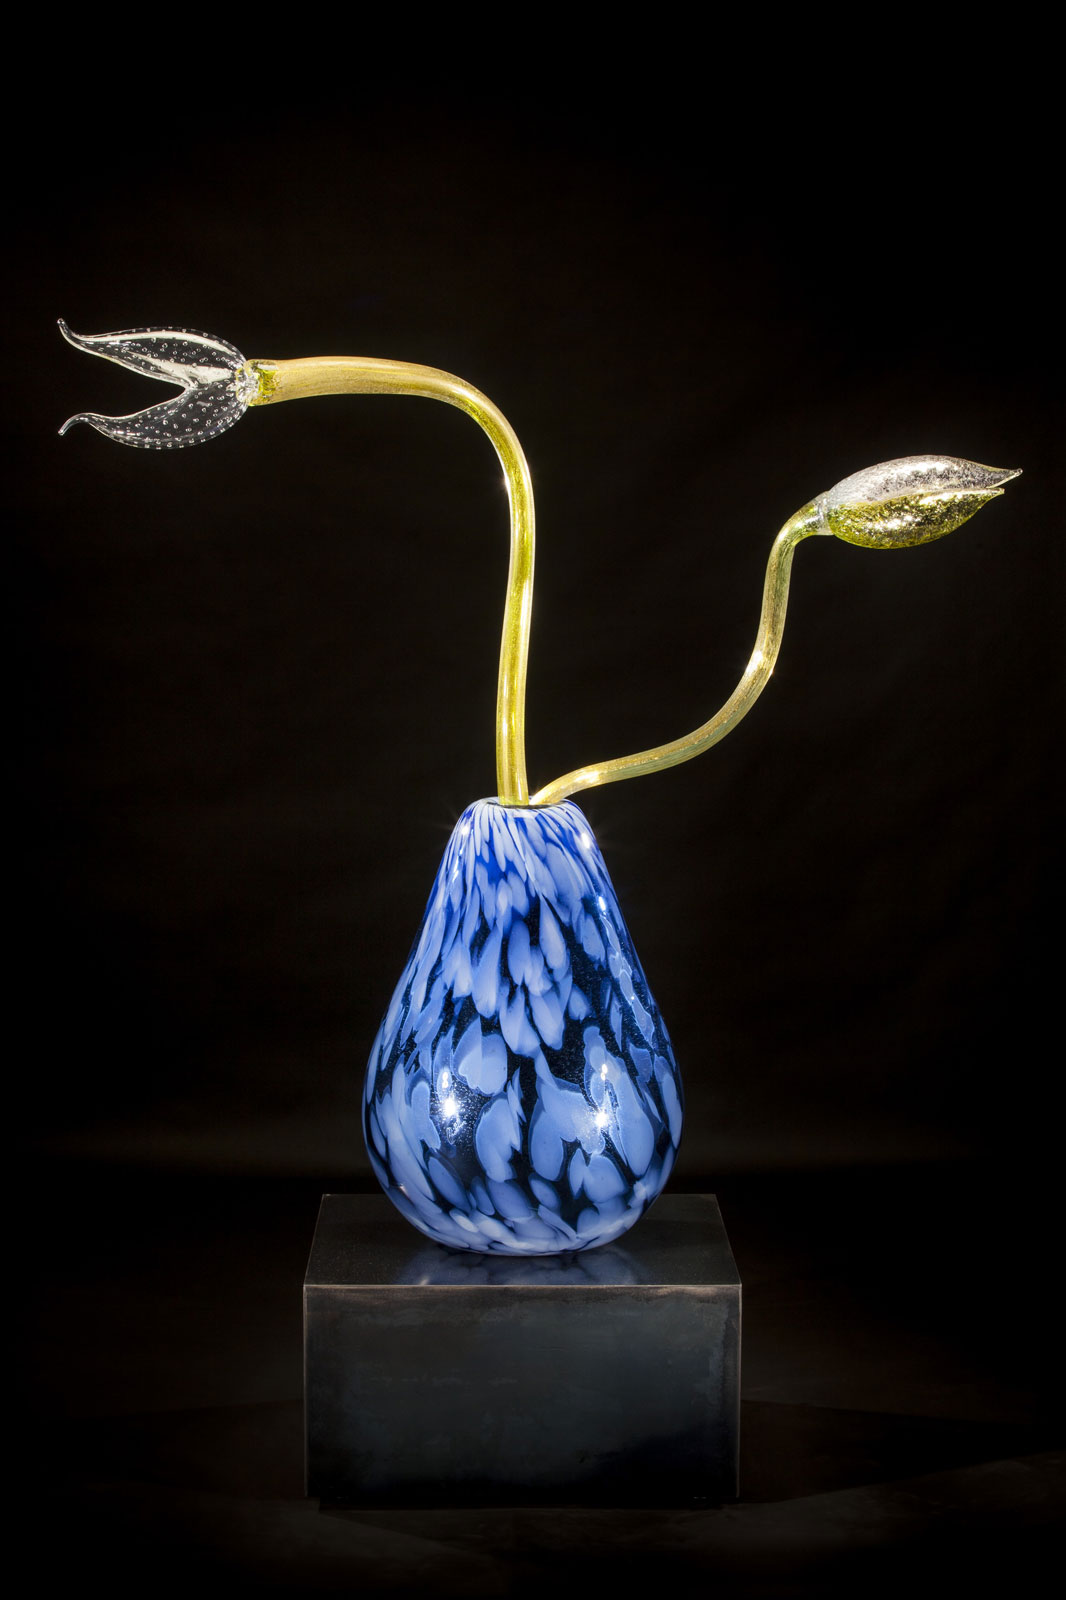 Galena Cobalt Ikebana with Olivene Stems, 2012 by Dale Chihuly